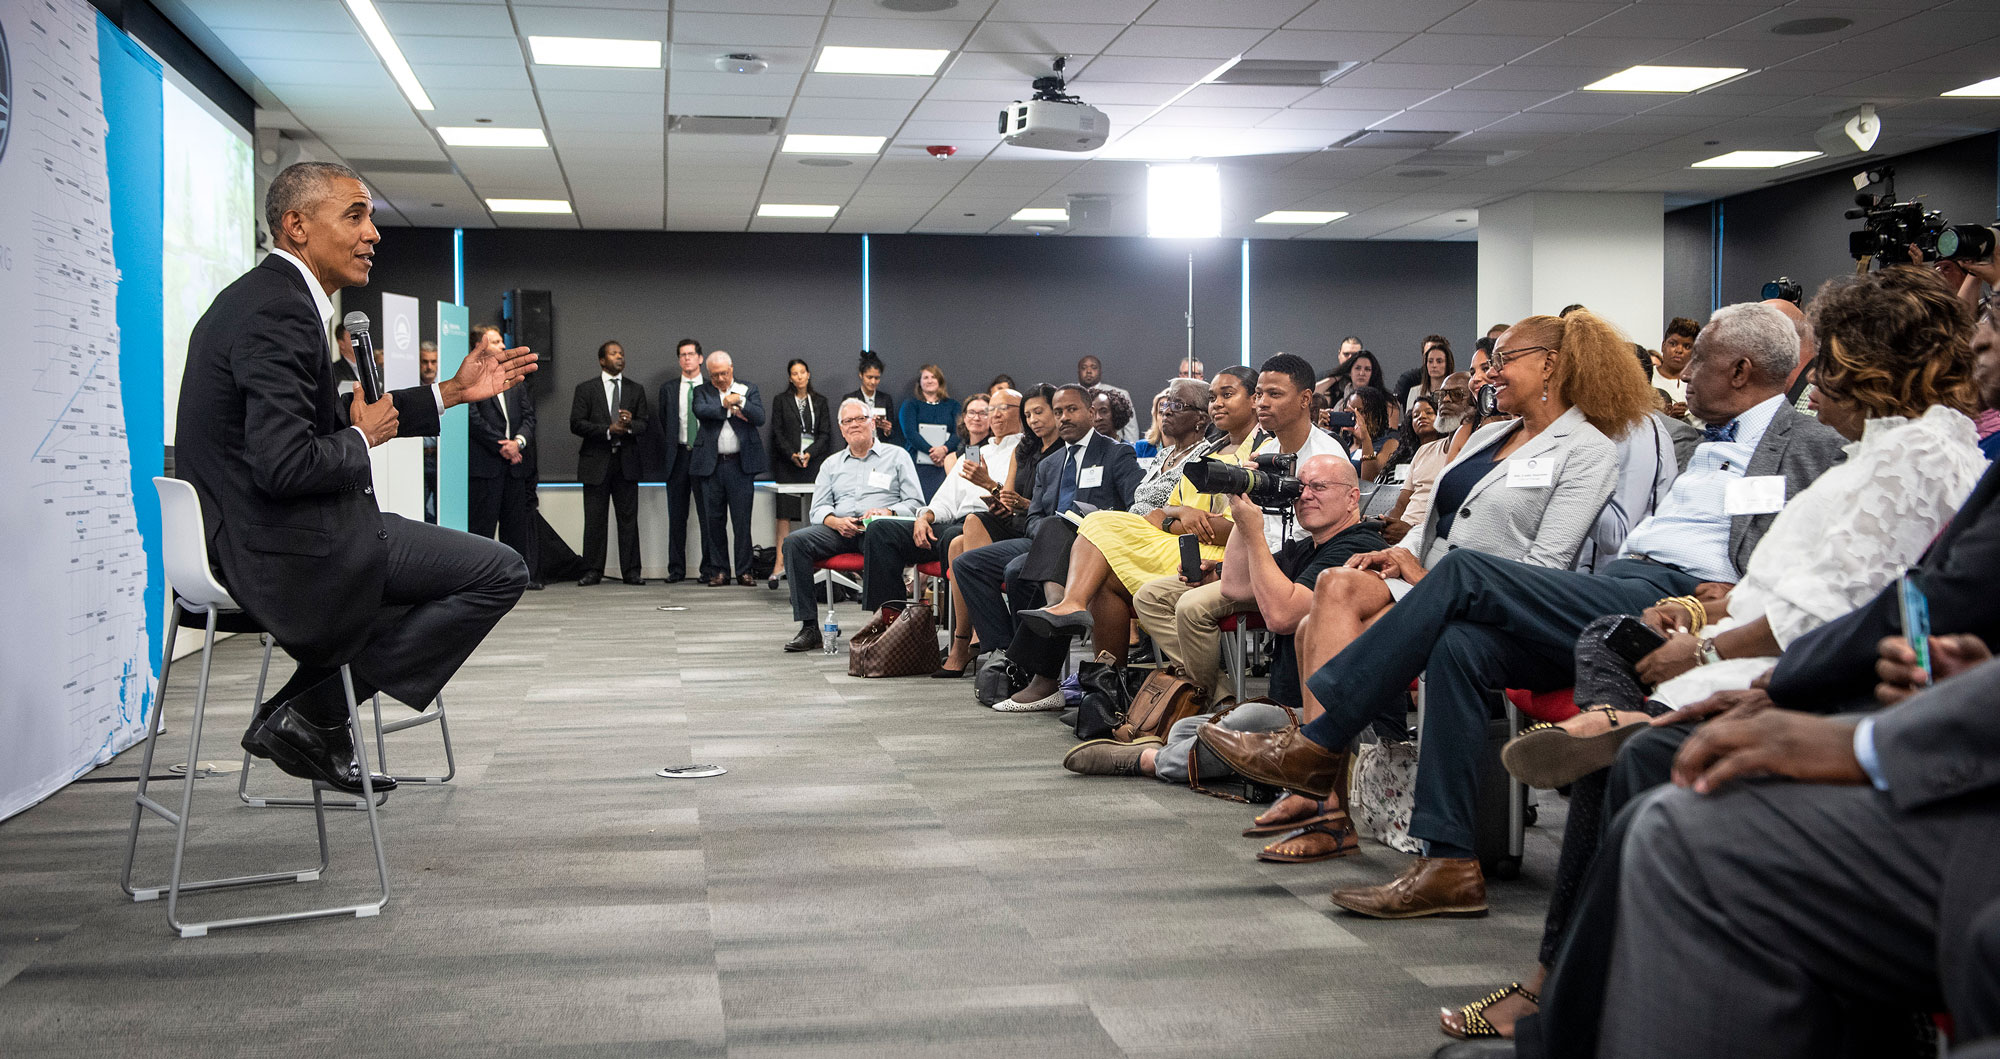 President Obama giving a presentation to a large group of people of medium to deep skin tones. President Obama is seated in a small chair. To his left is a projecting screen, a map, and Obama Foundation signs.